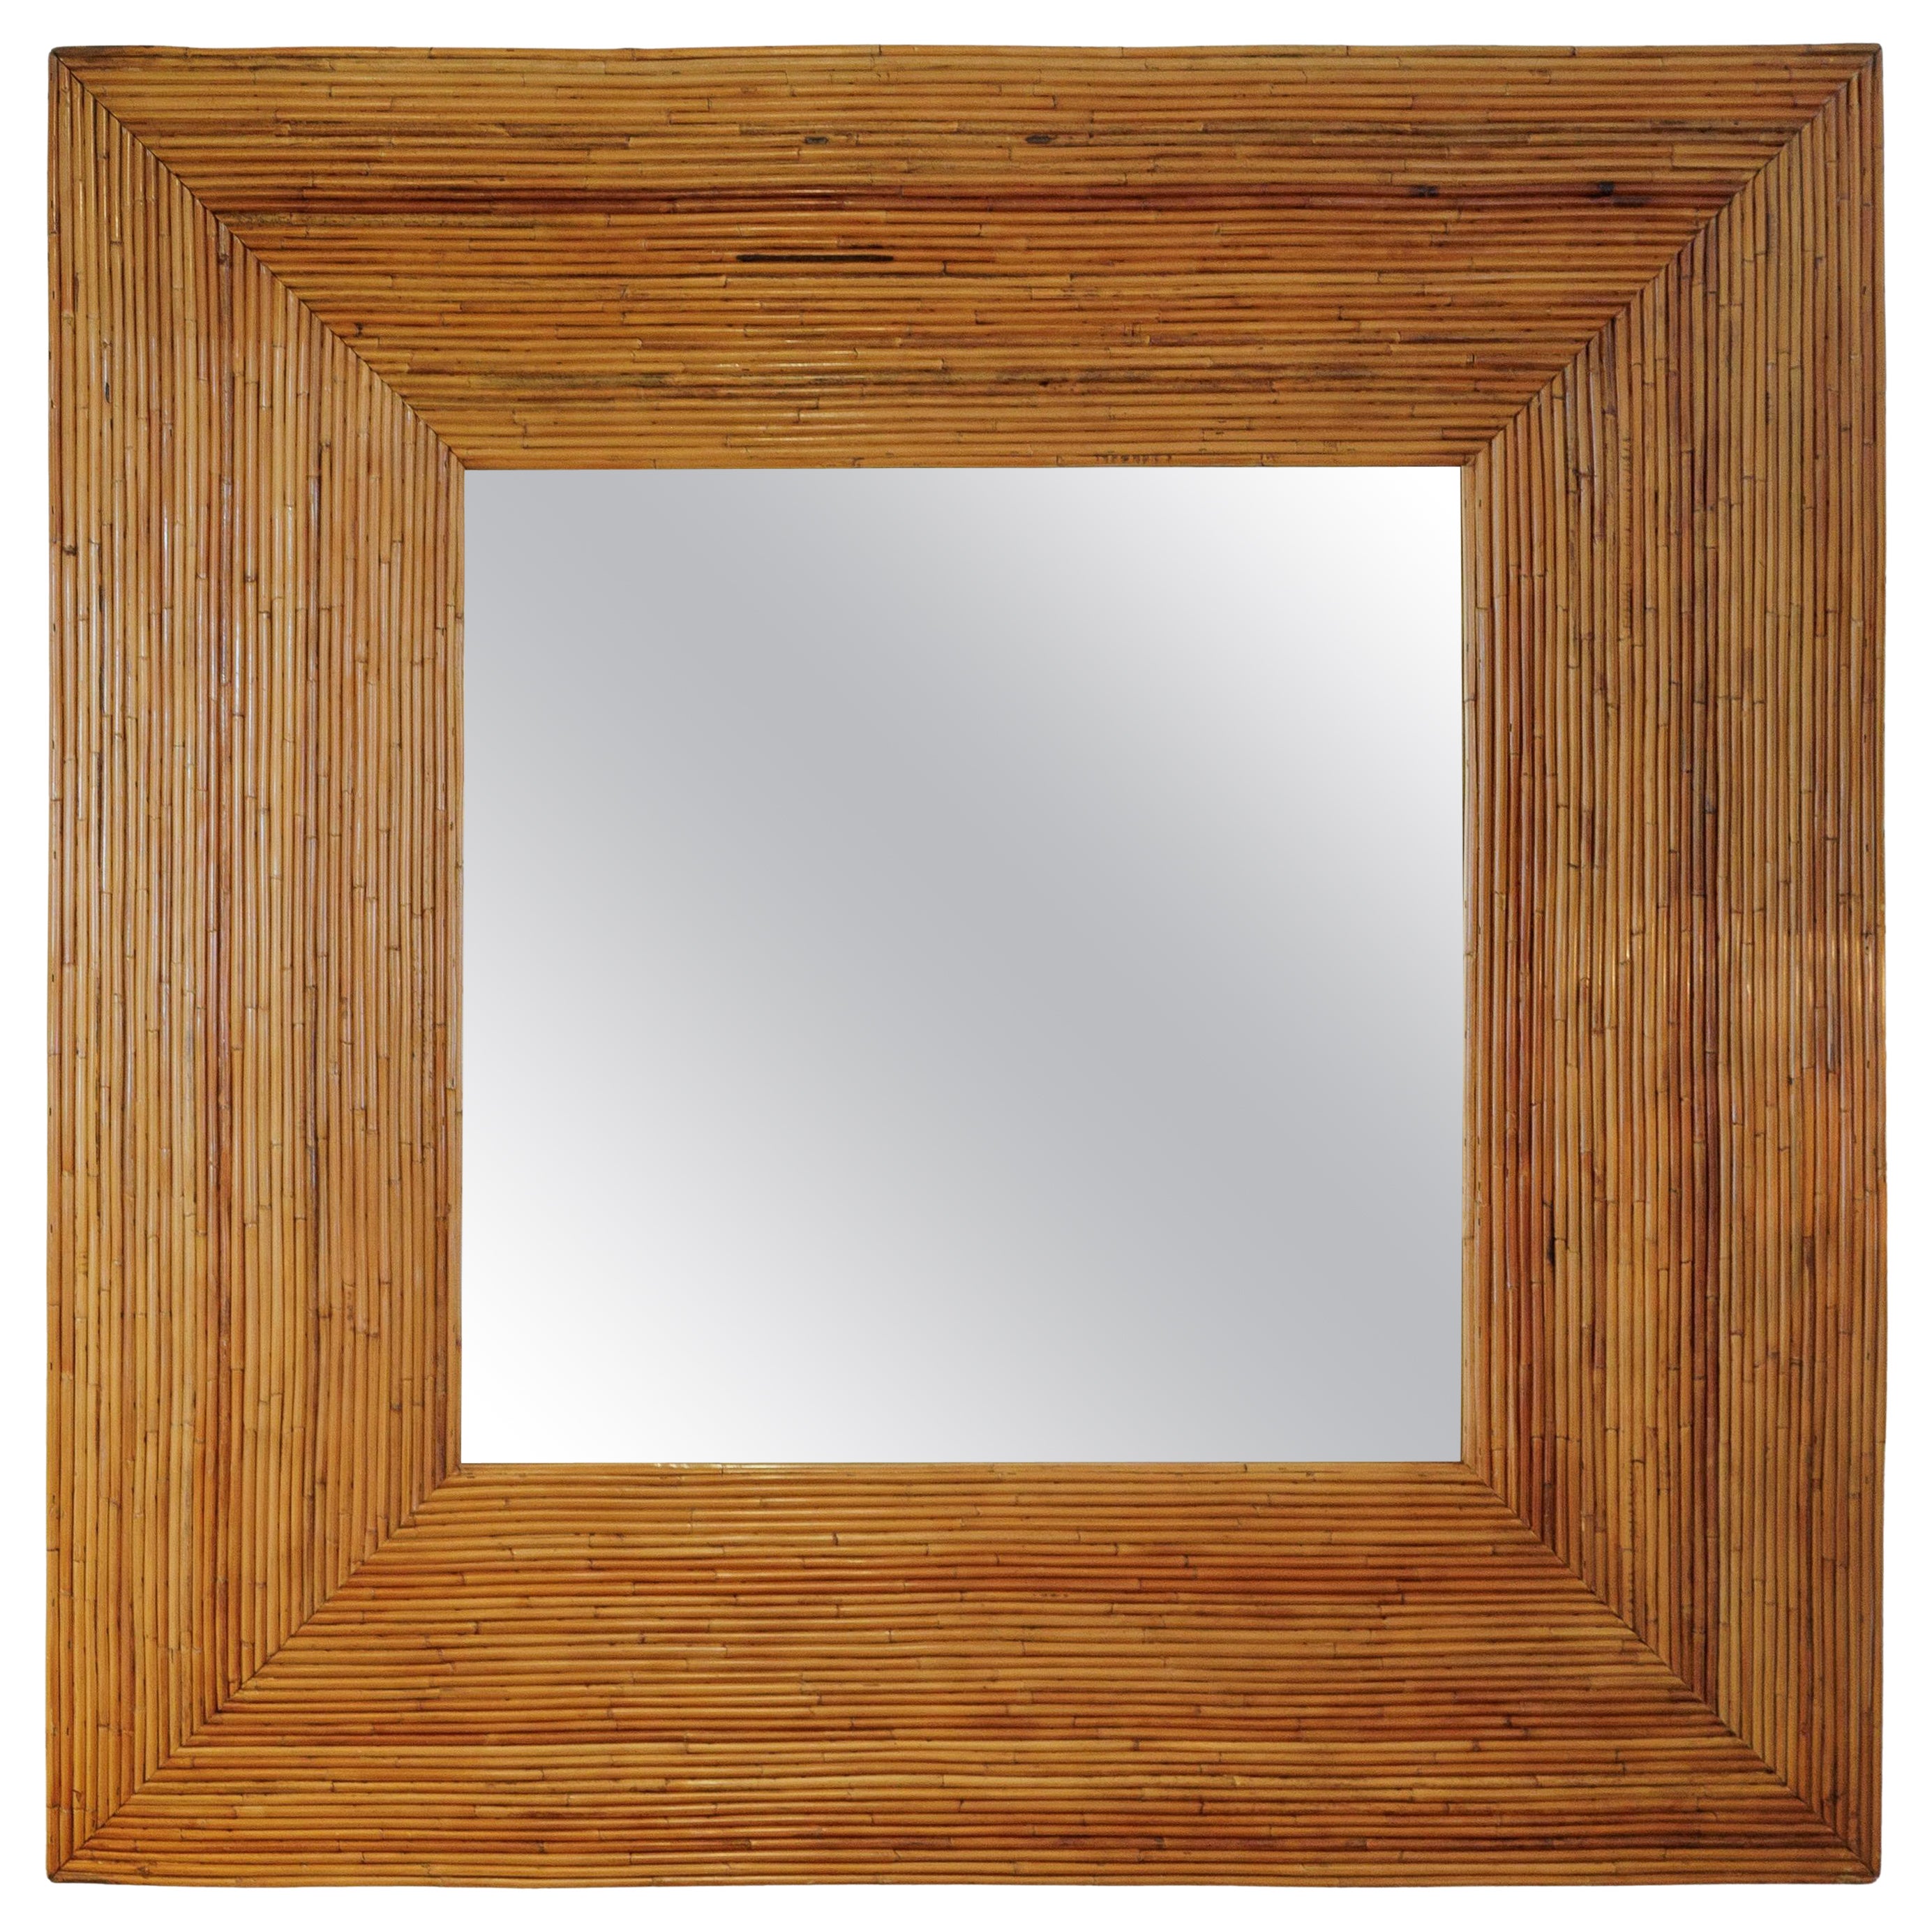 Square Pencil Reed Bamboo Surround Mirror For Sale